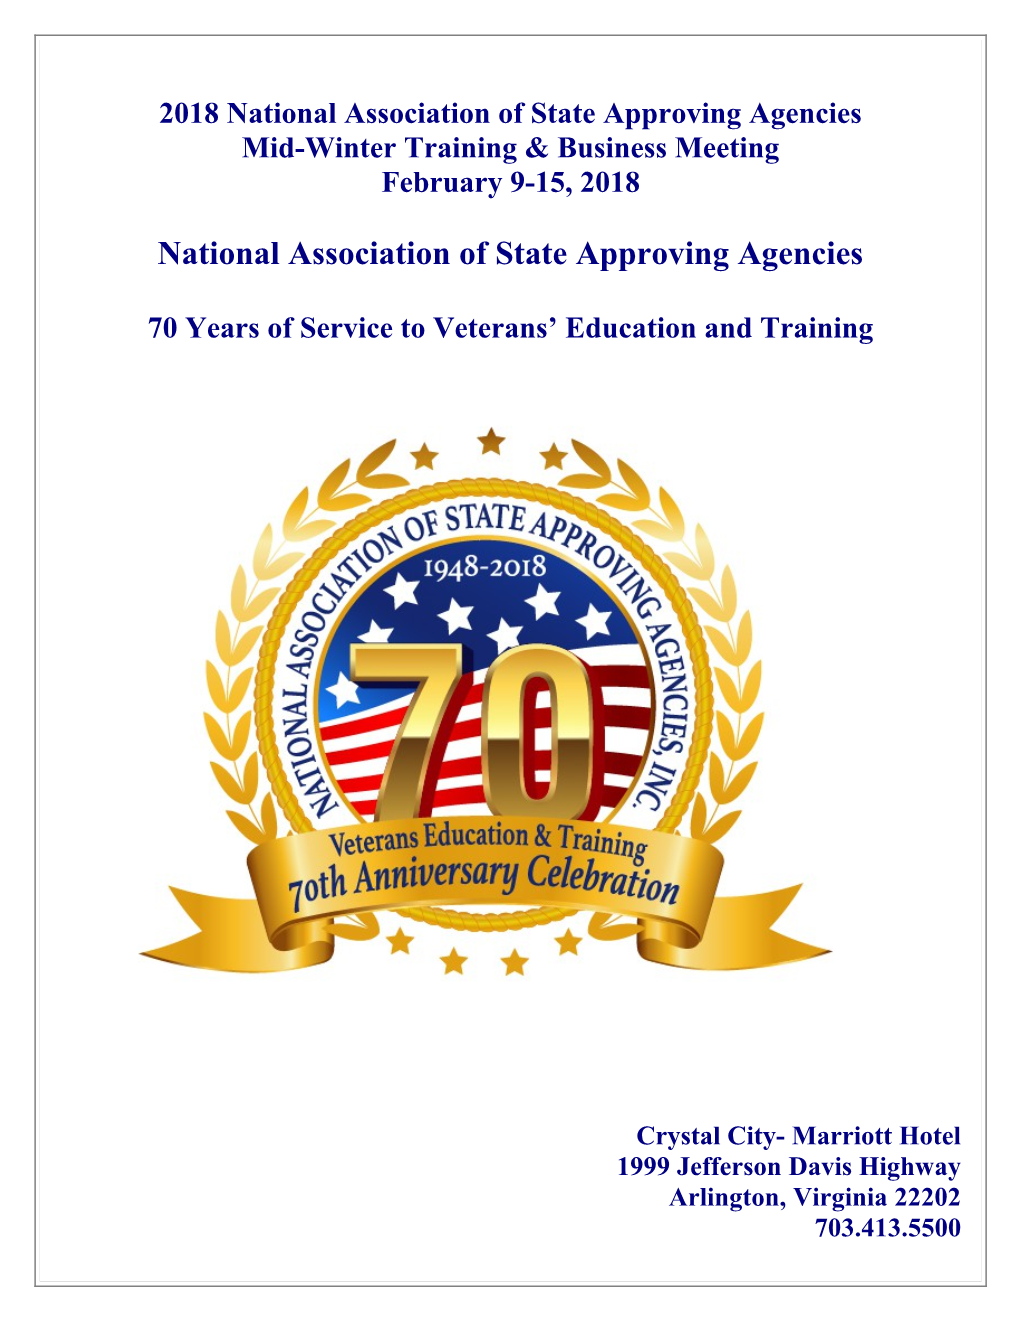 2018 National Association of State Approving Agencies